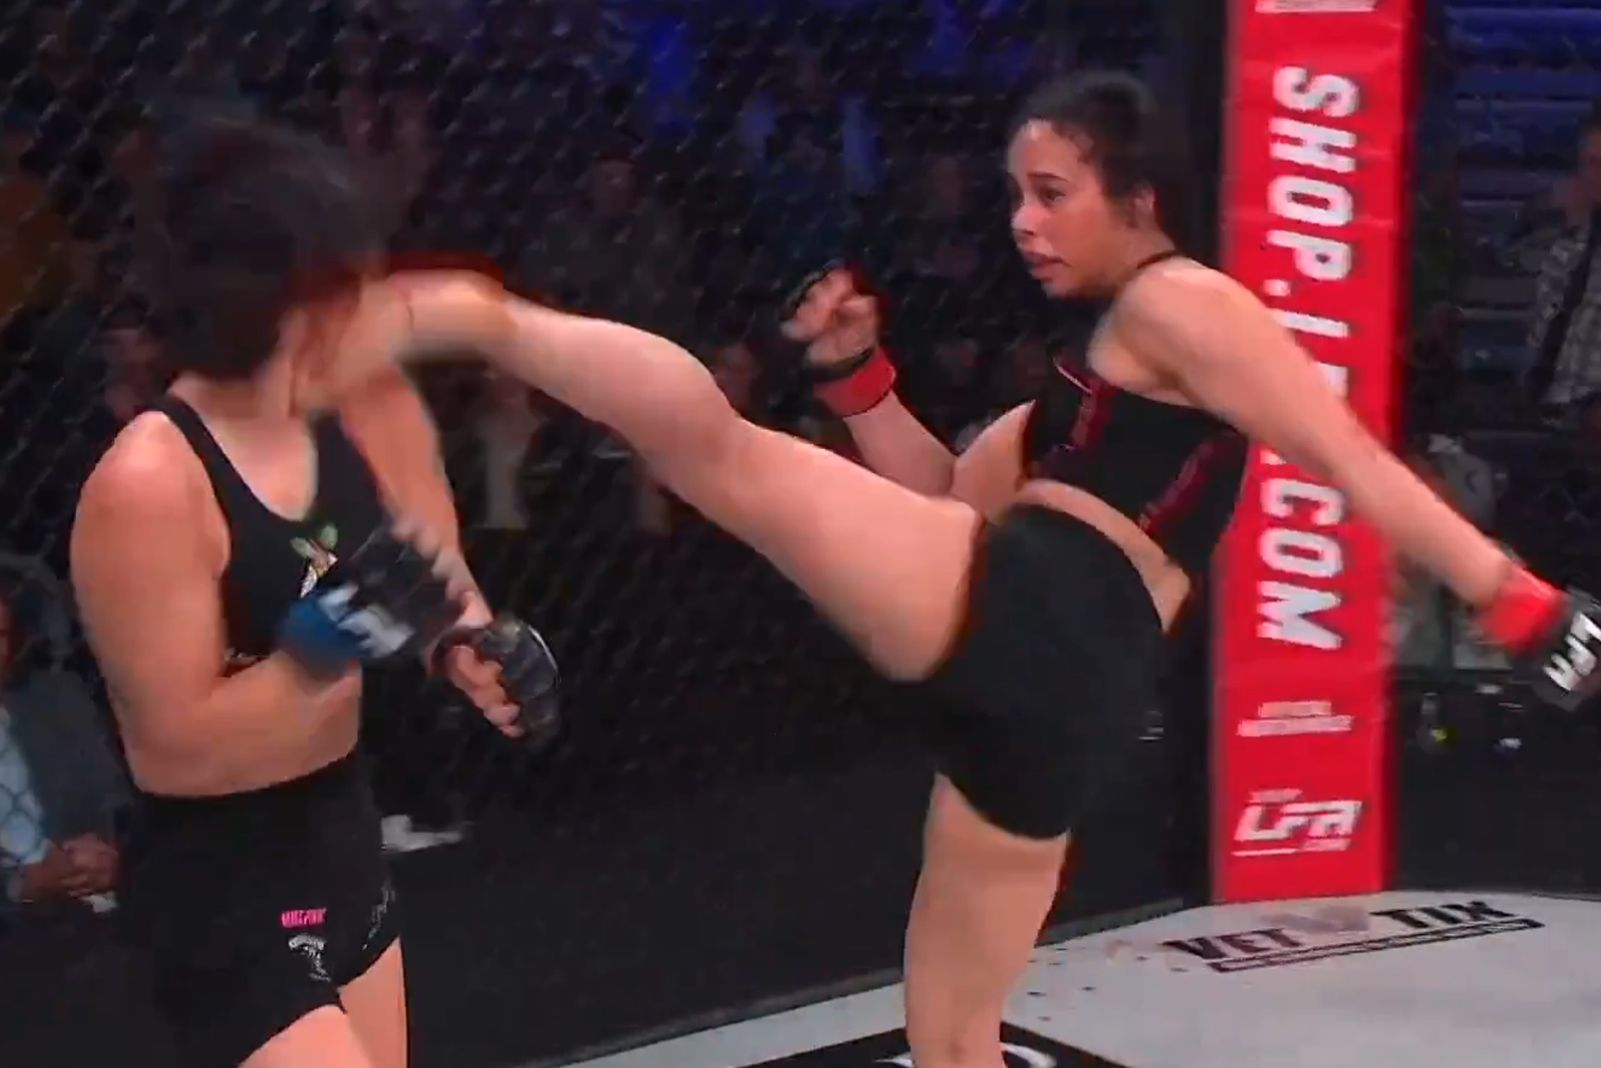 Brutal knockout in a women's fight.  She fell helplessly on the boards